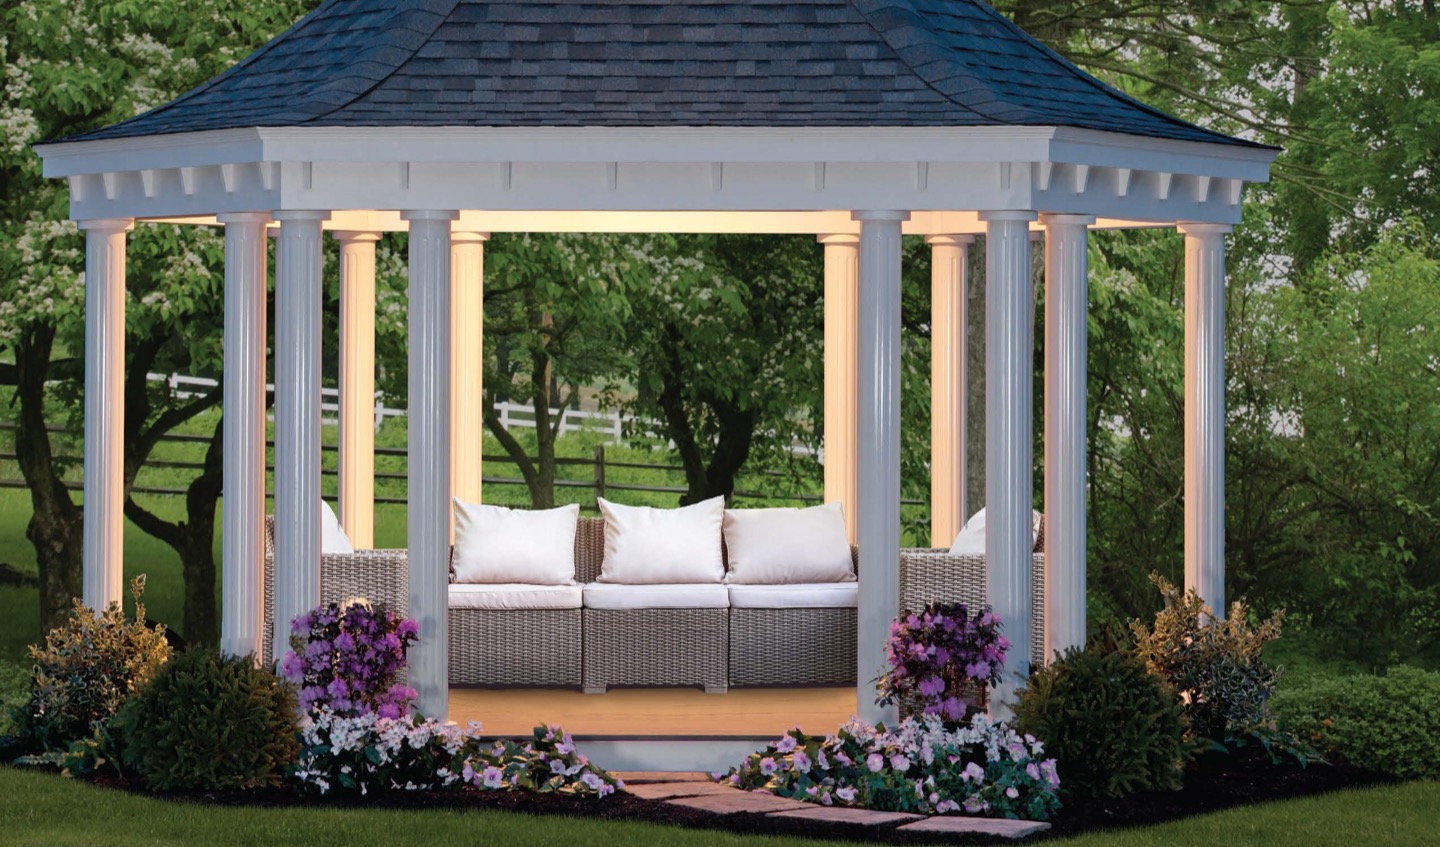 Bell shaped pavilion styled with wicker furniture